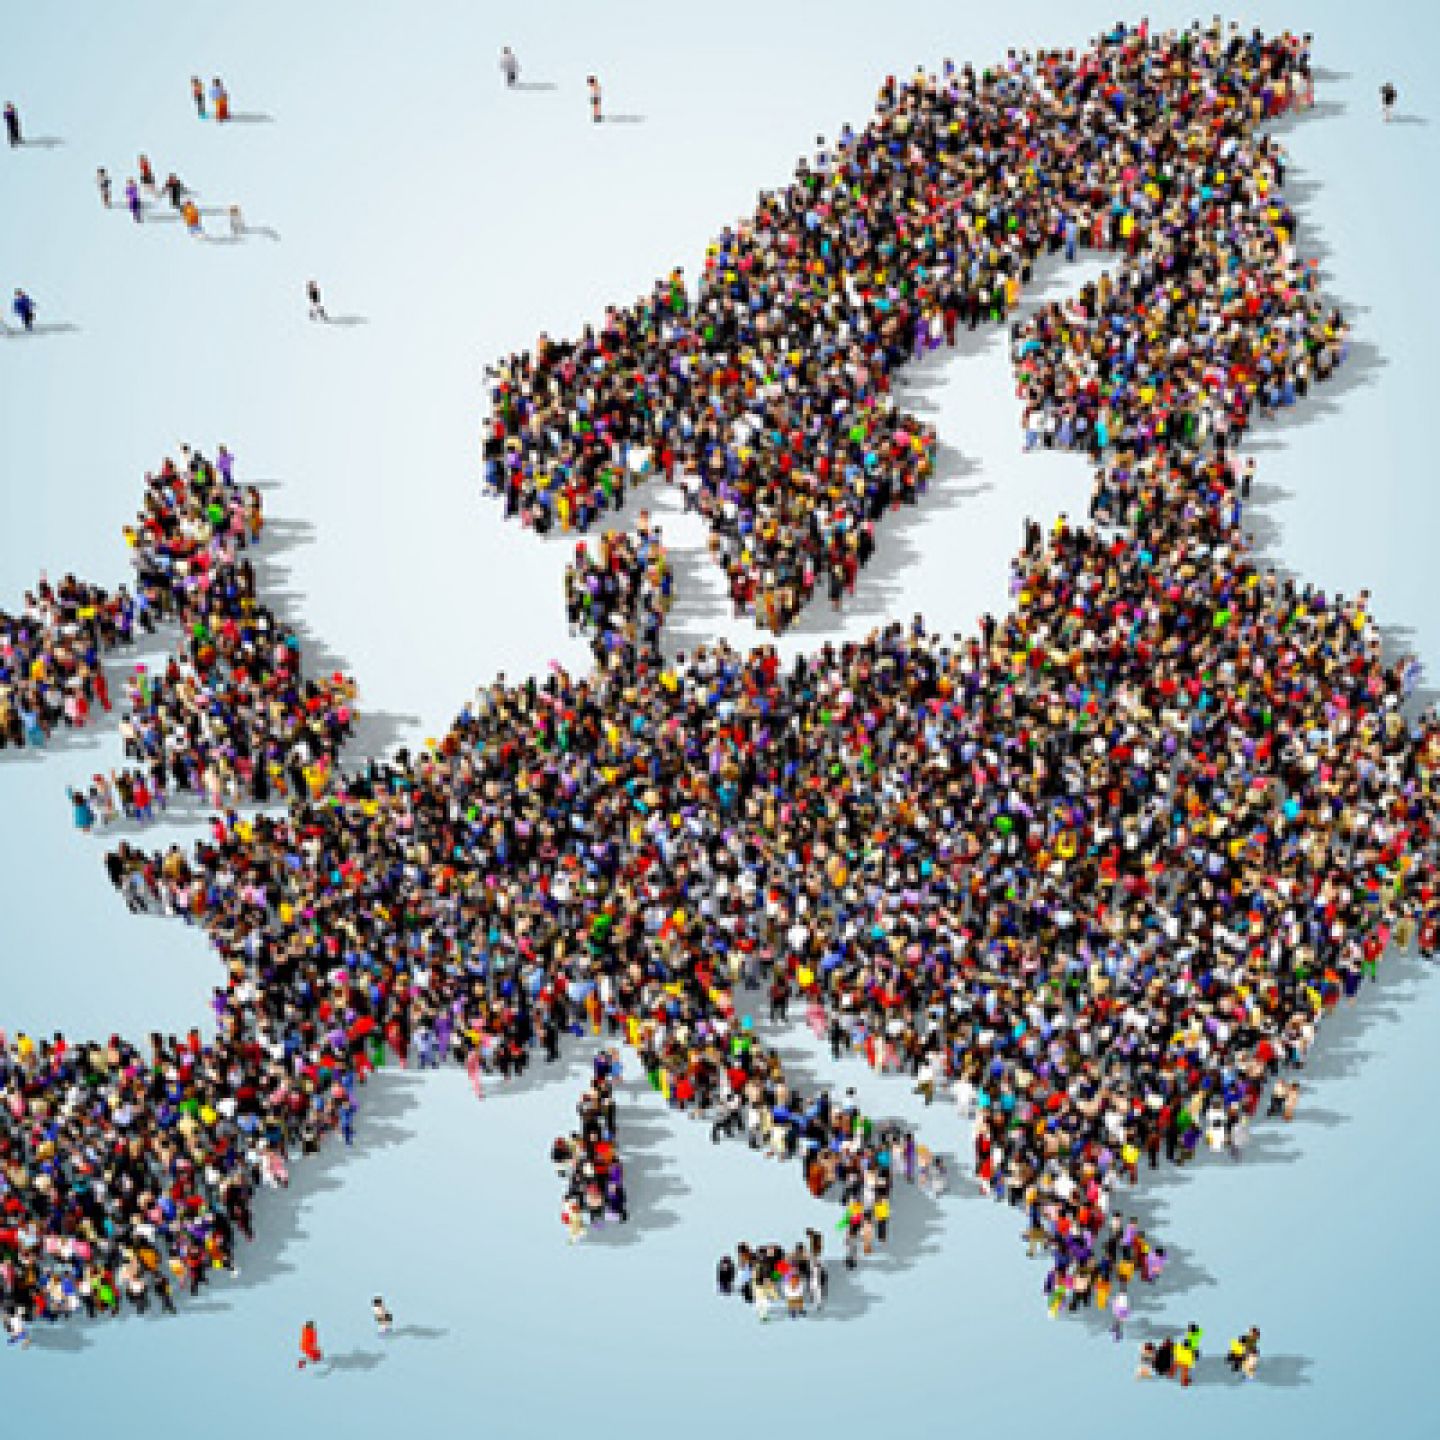 Illustration of a crowd of people forming a map of Europe.